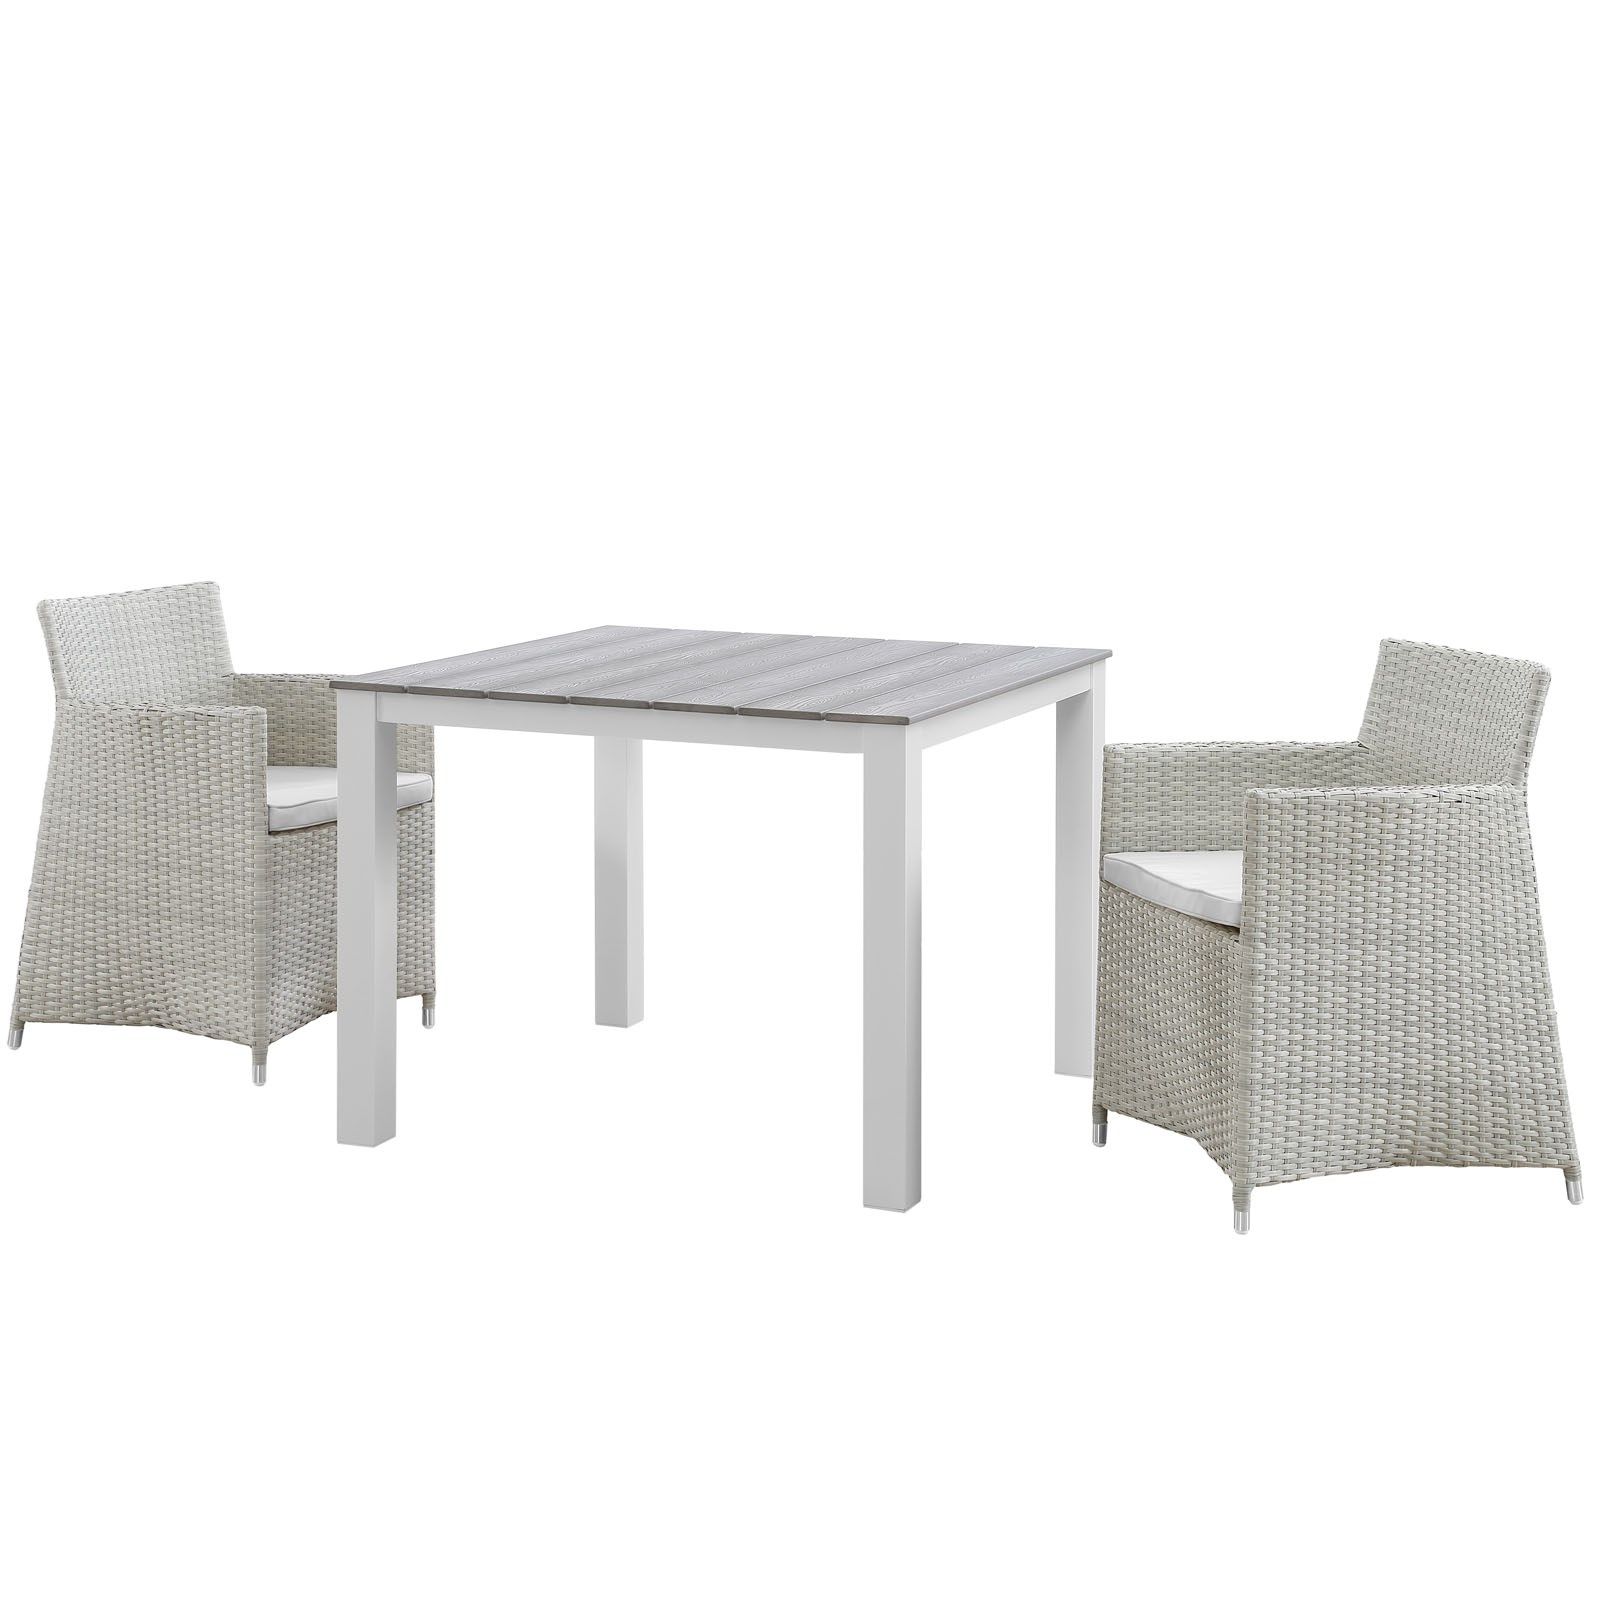 White 3 Piece Outdoor Seating Patio Sets Pertaining To Widely Used Junction 3 Piece Outdoor Patio Wicker Dining Set In Gray White – Hyme (View 8 of 15)